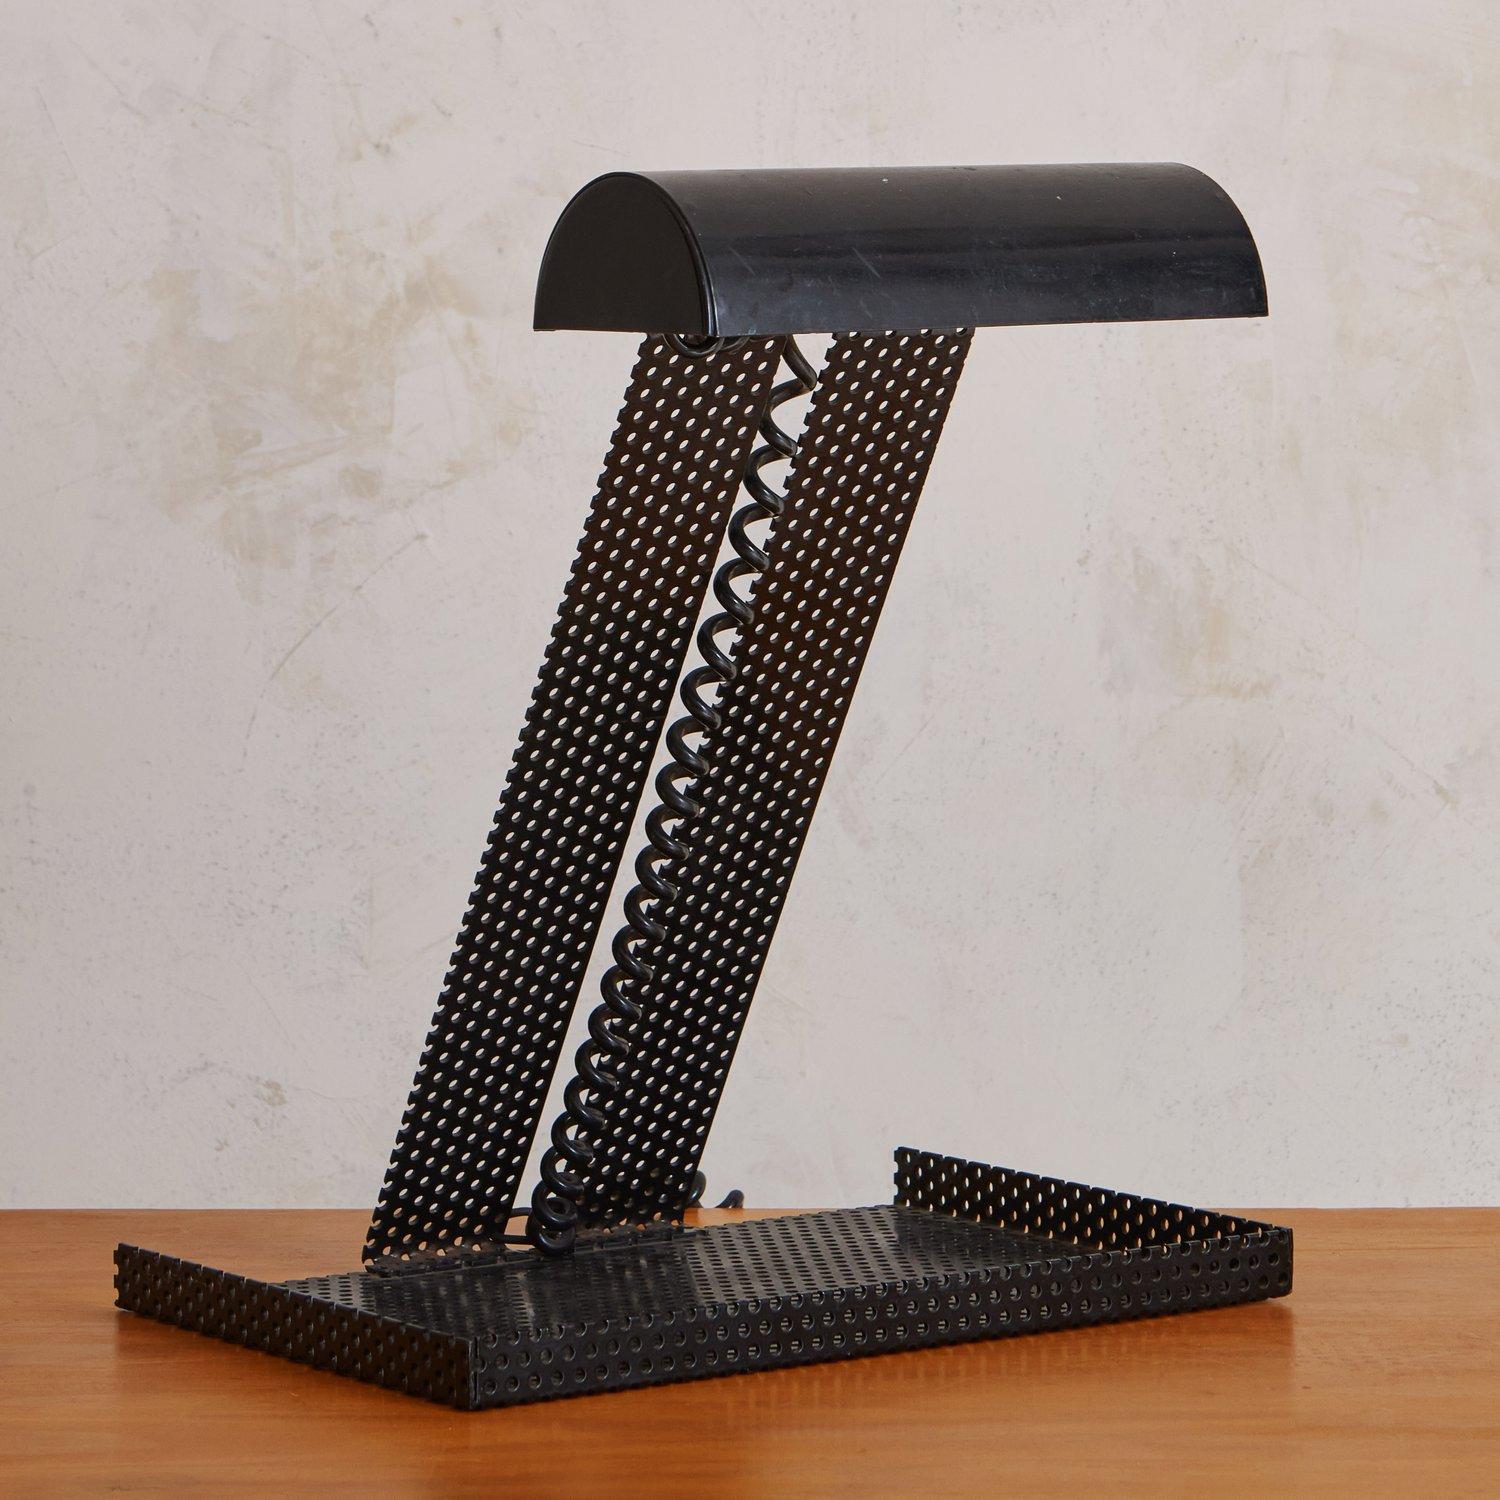 A sculptural black perforated metal table lamp sourced in France. This lamp has an oversized rectangular base perfect for storing your treasures and desk supplies. It has a cylindrical demilune shade and black coiled cord. 20th Century.